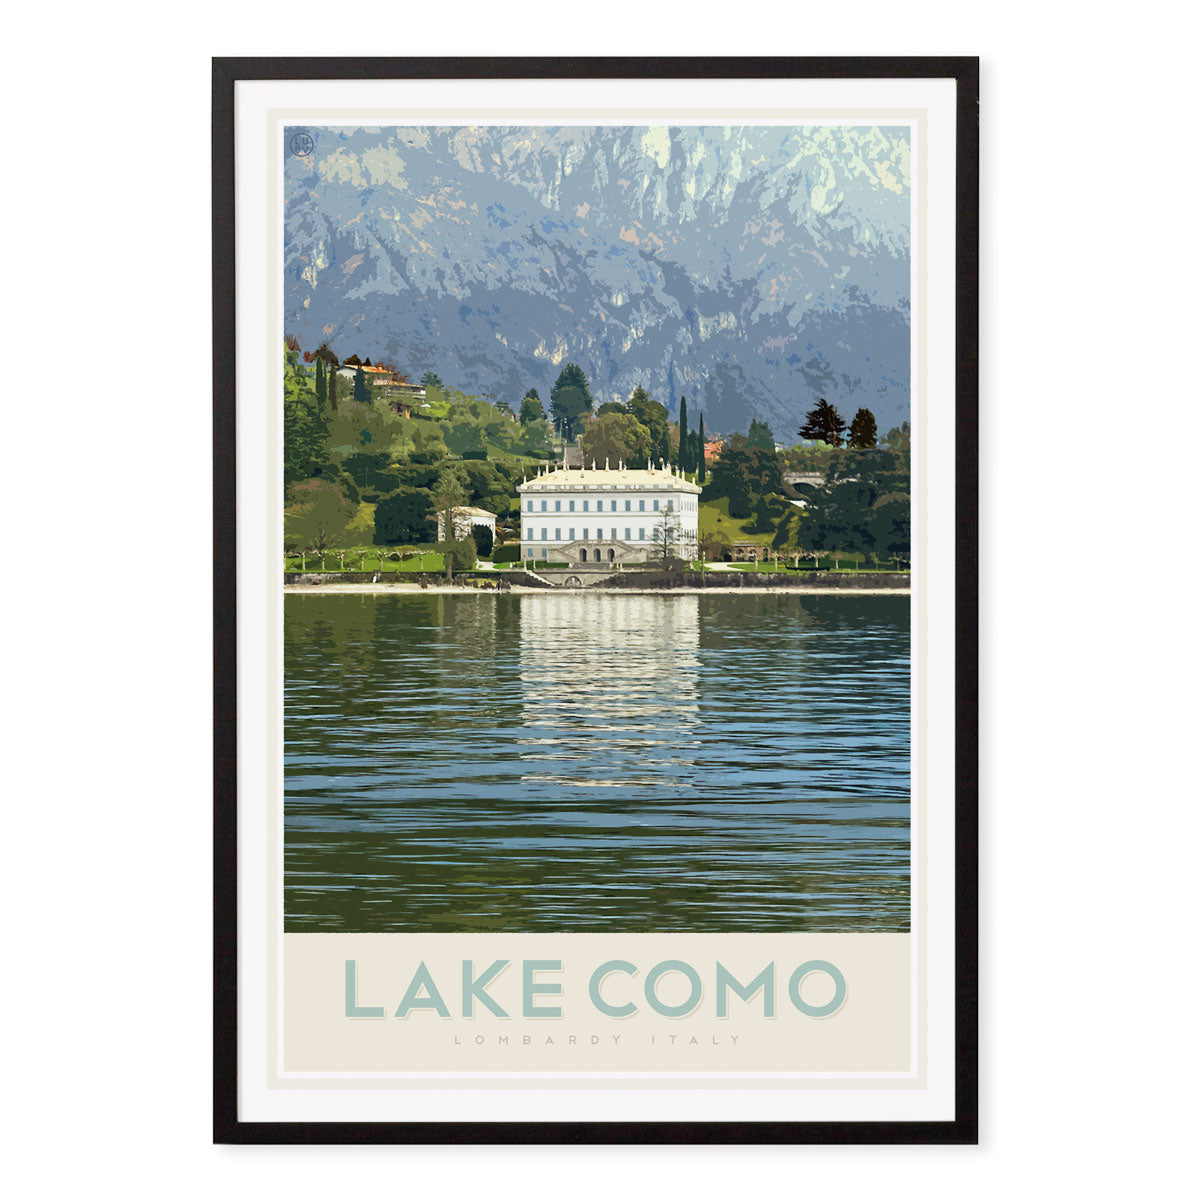 Lake Como Italy, vintage travel style black framed print by places we luv